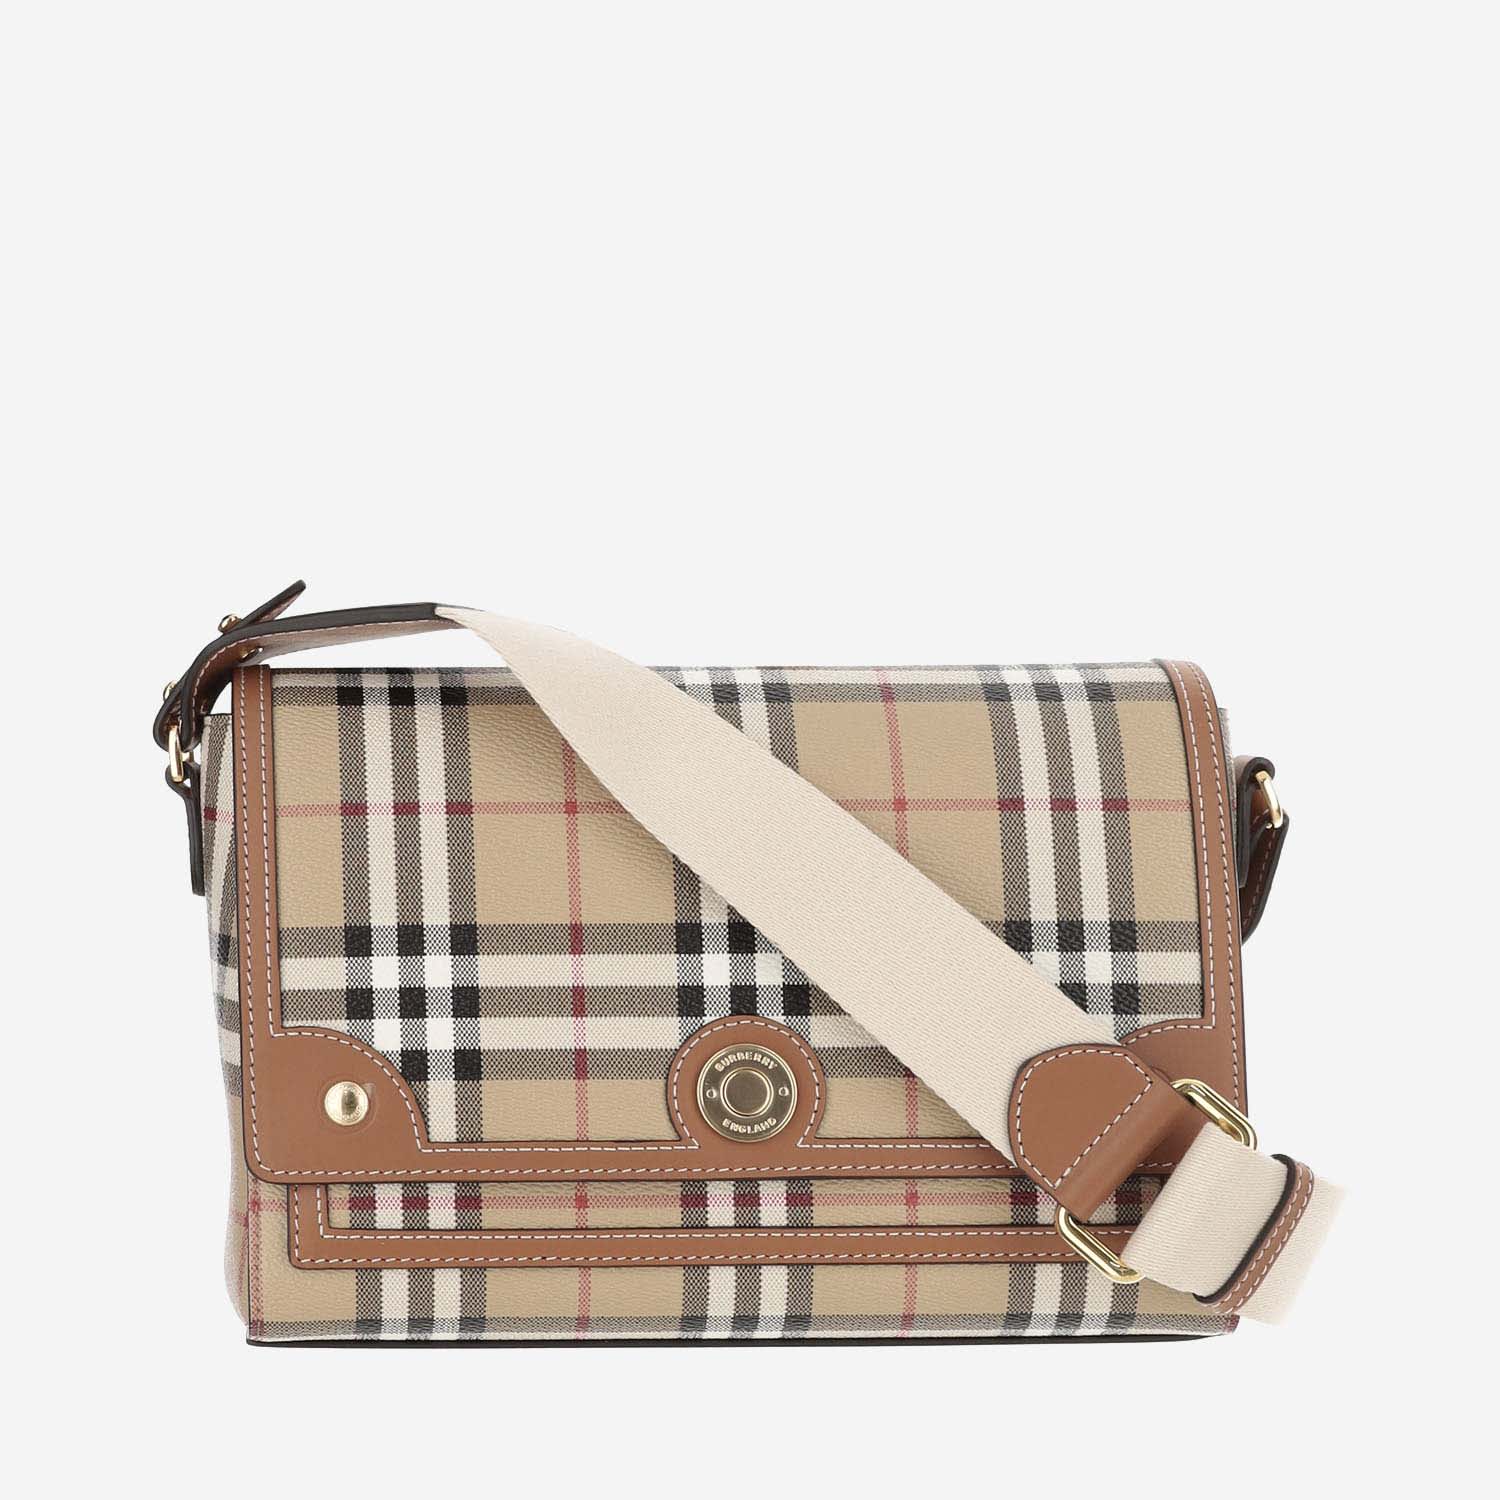 Burberry Bag With Check Pattern